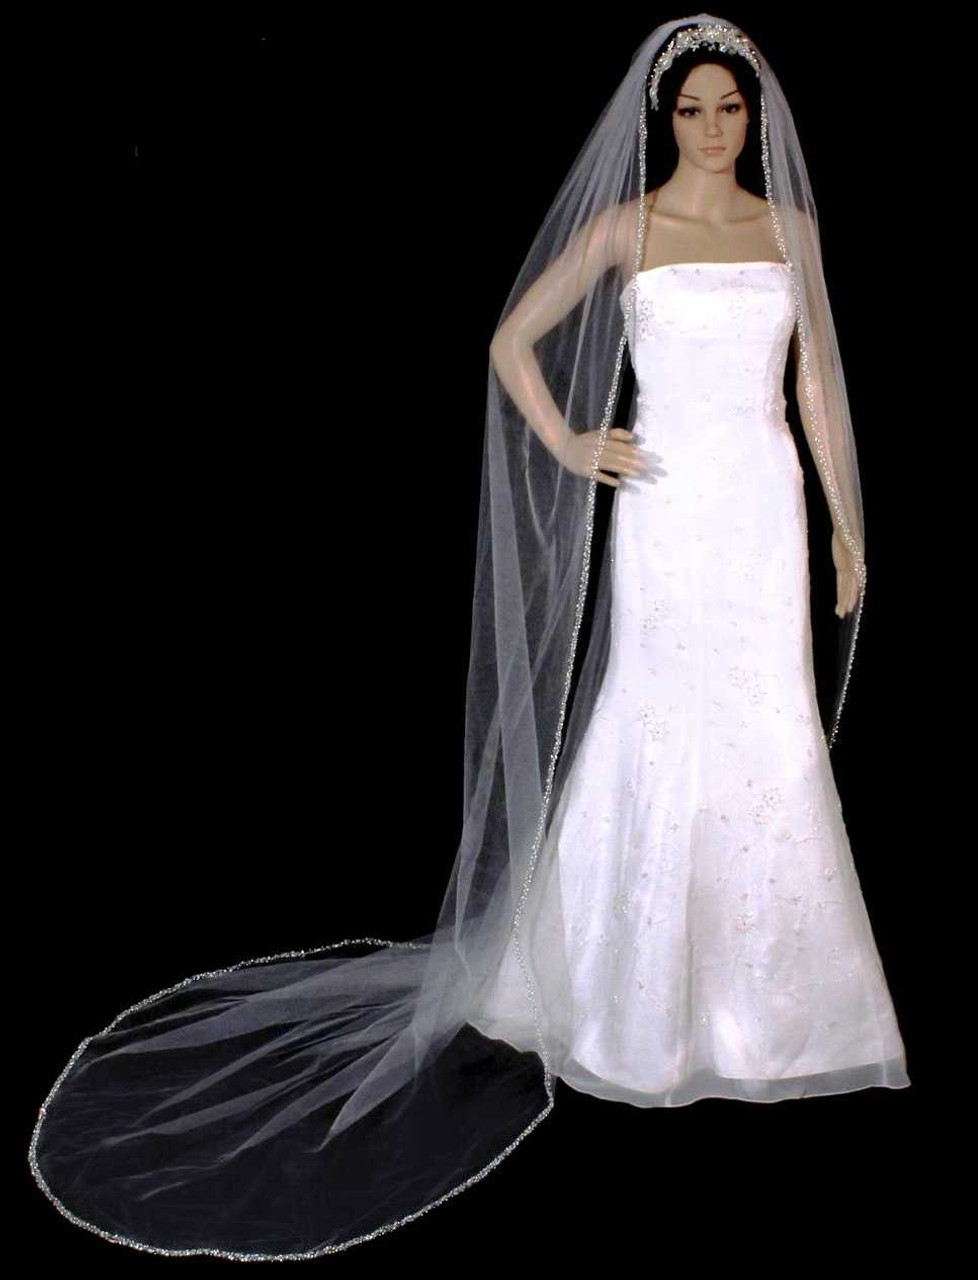 https://cdn11.bigcommerce.com/s-zb3qt33o/images/stencil/1280x1280/products/17271/56453/Cathedral-Length-Beaded-Pearl-and-Sequin-Wedding-Veil_35586__83719.1688168434.jpg?c=2